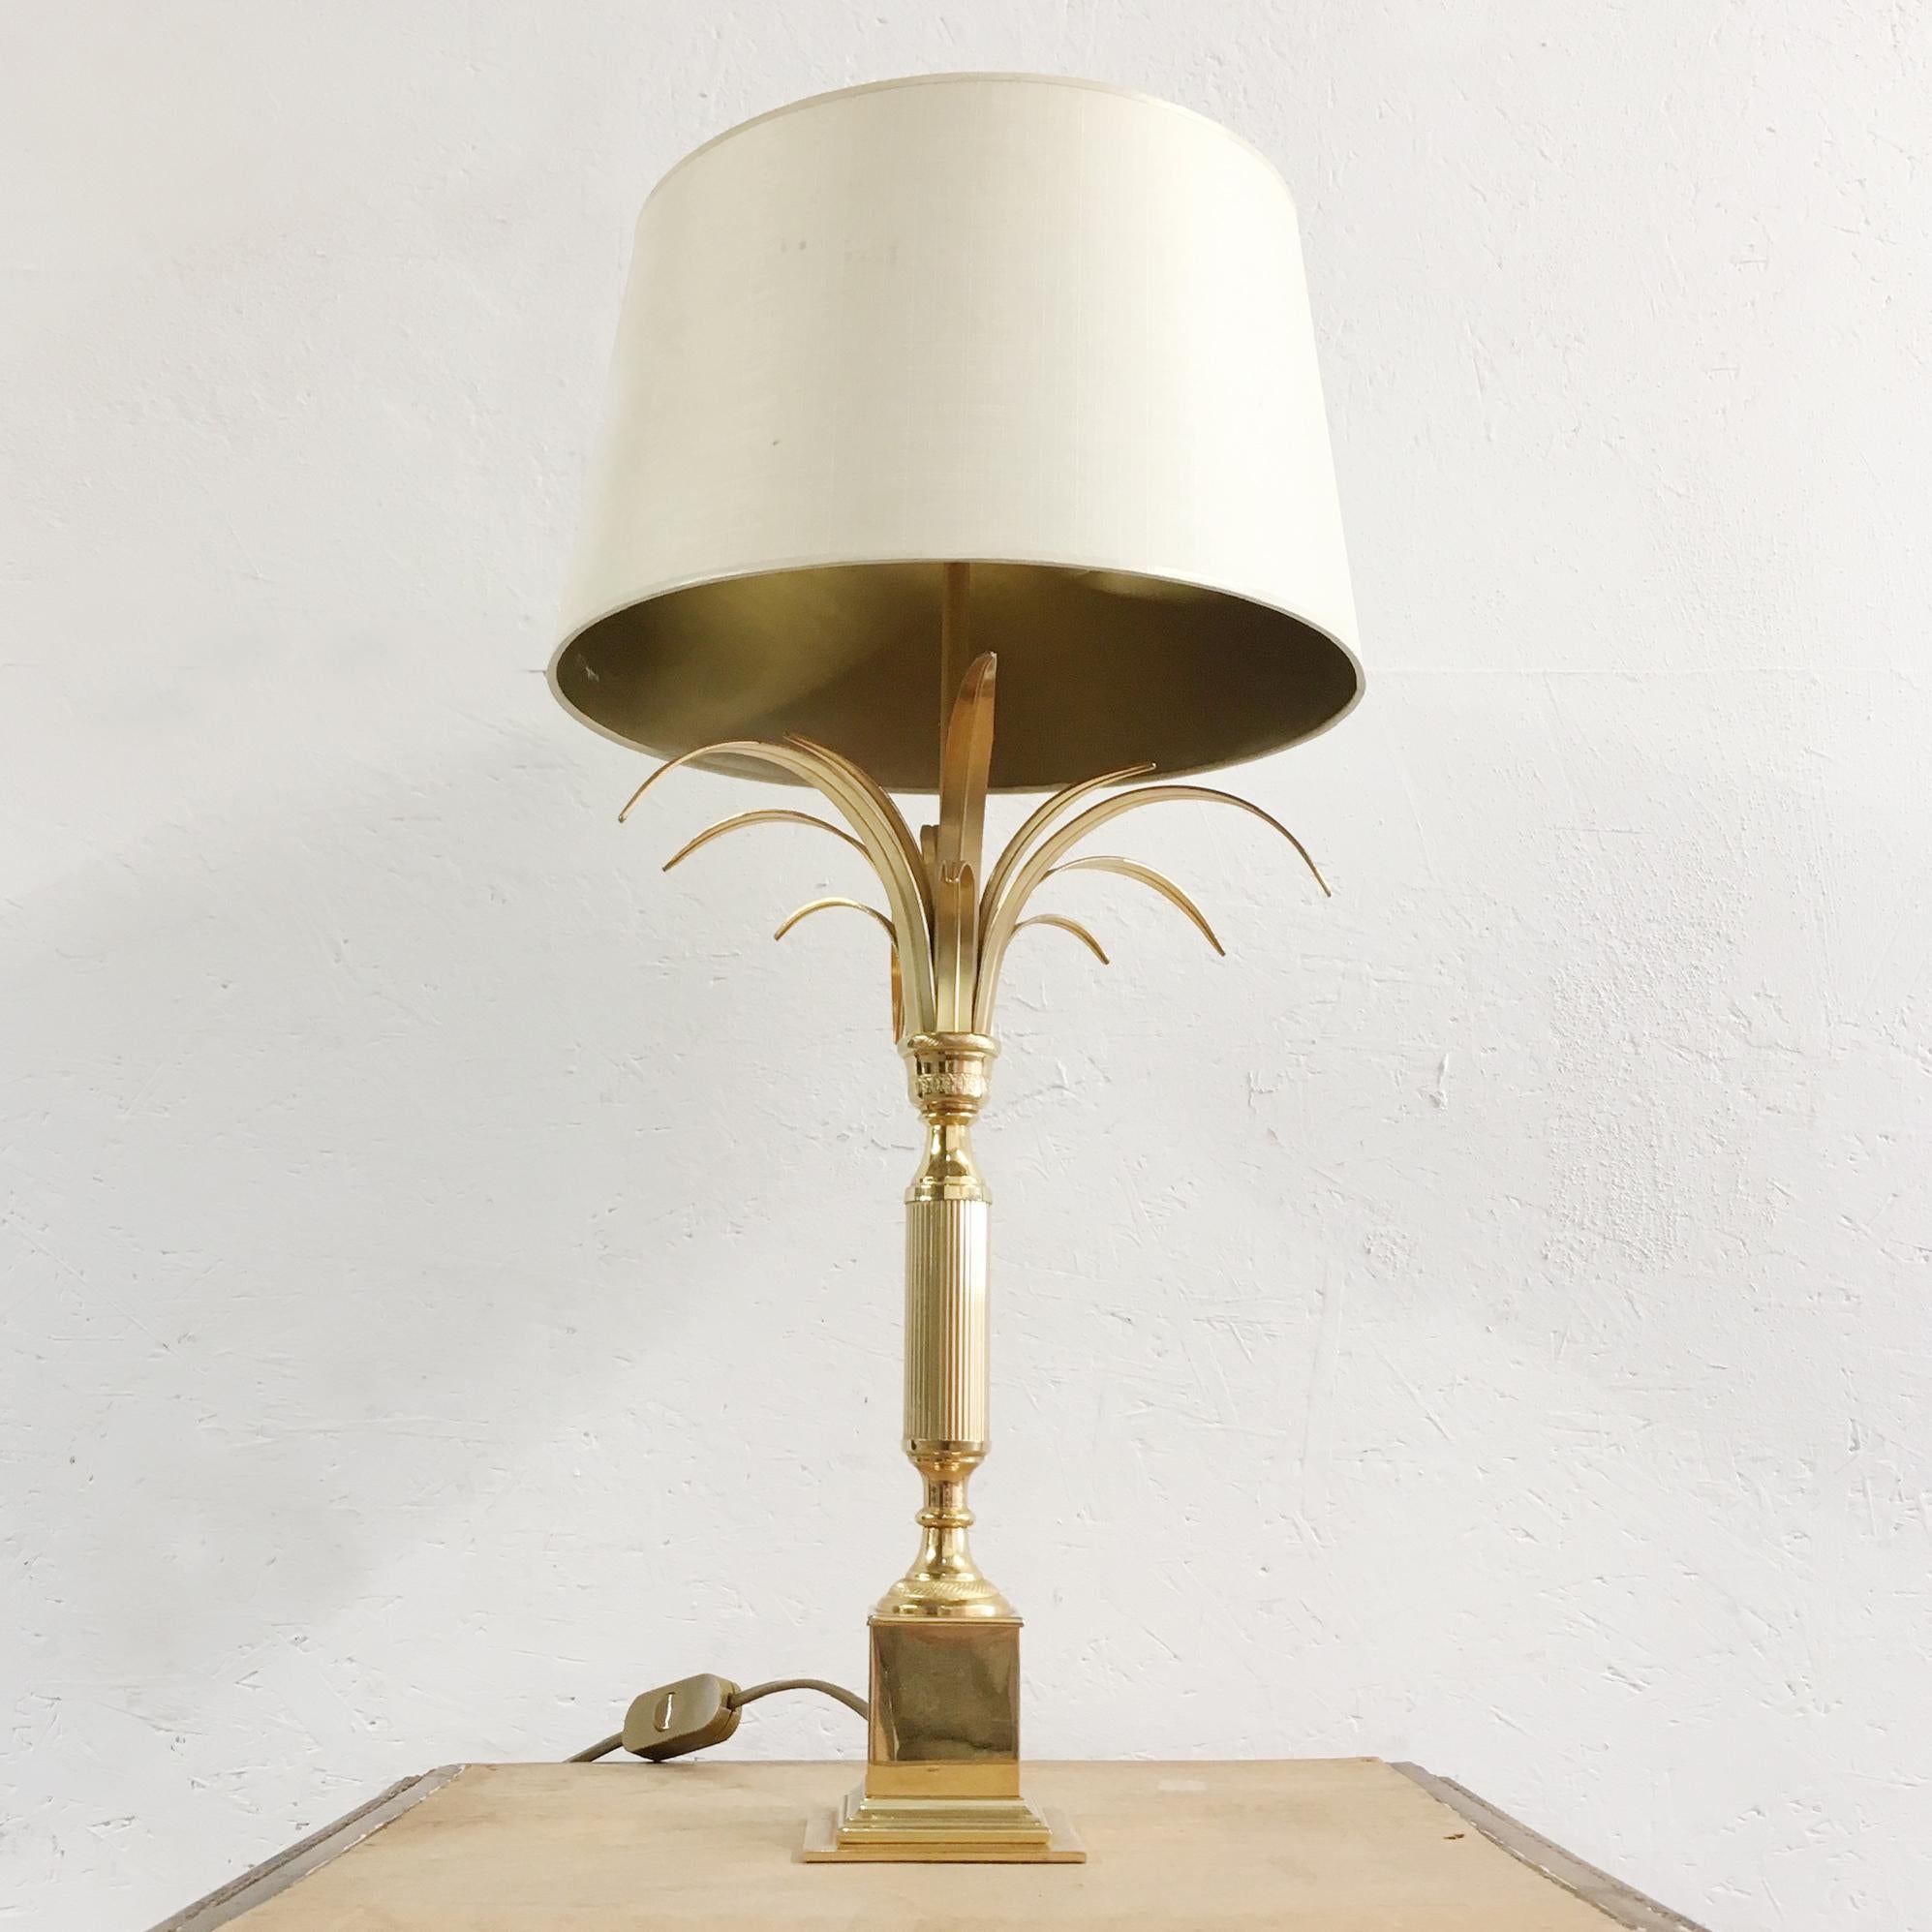 S A Boulanger large reed lamp, pineapple fronds
1960s-1970s
Brass
Made by S A Boulanger, Belgium
Two E14 Bulbs, 60 Watt max

Measures: 
Height 65cm
Fronds width 27cm
Base 9 x 9 cm
Shade 30cm Width

Shade is original to the lamp and has